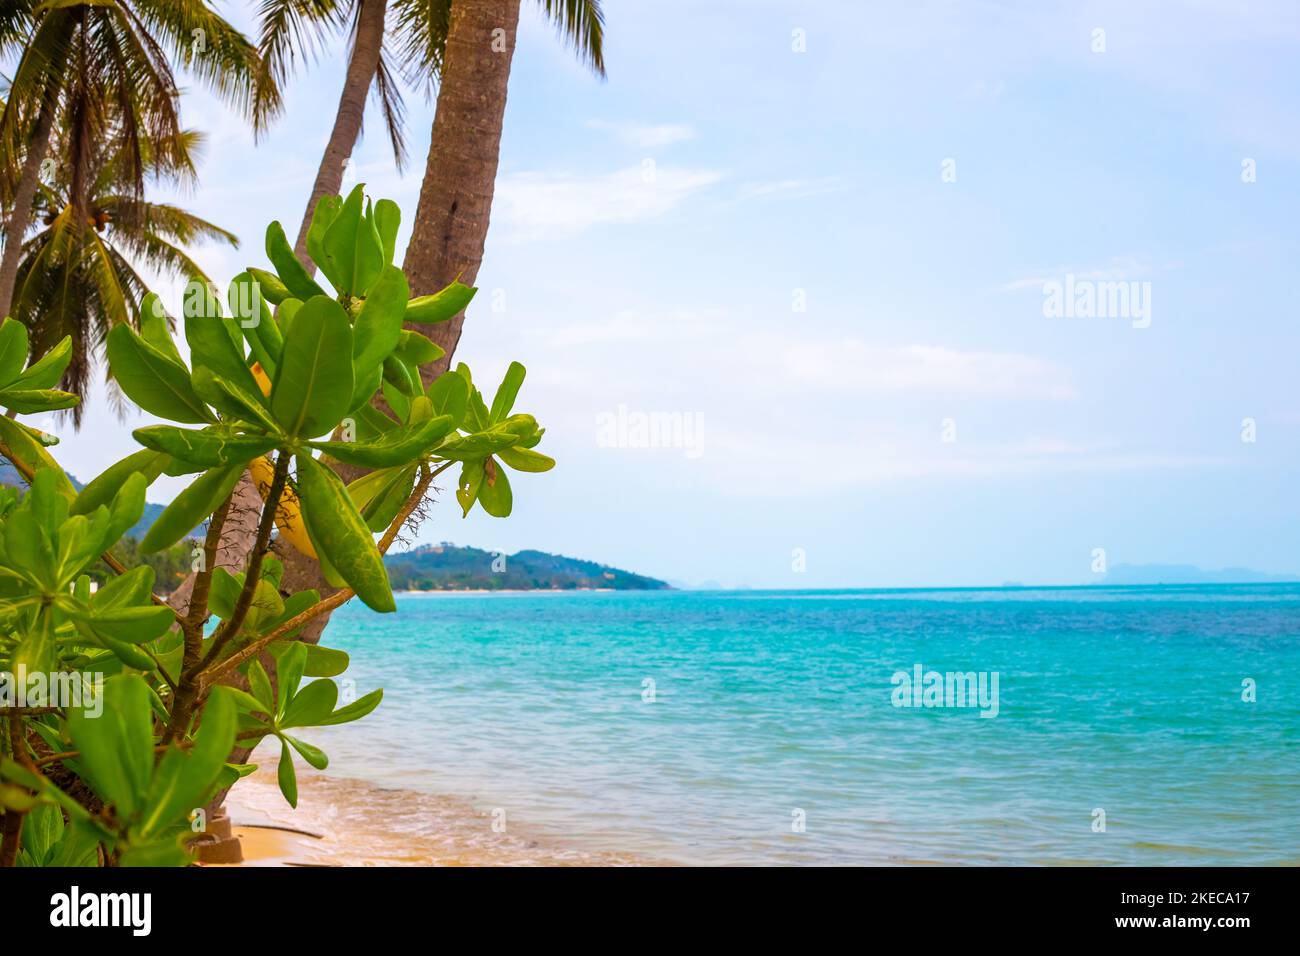 seascape. Palm trees and leaves of tropical trees on the seashore. Travel and tourism. Stock Photo